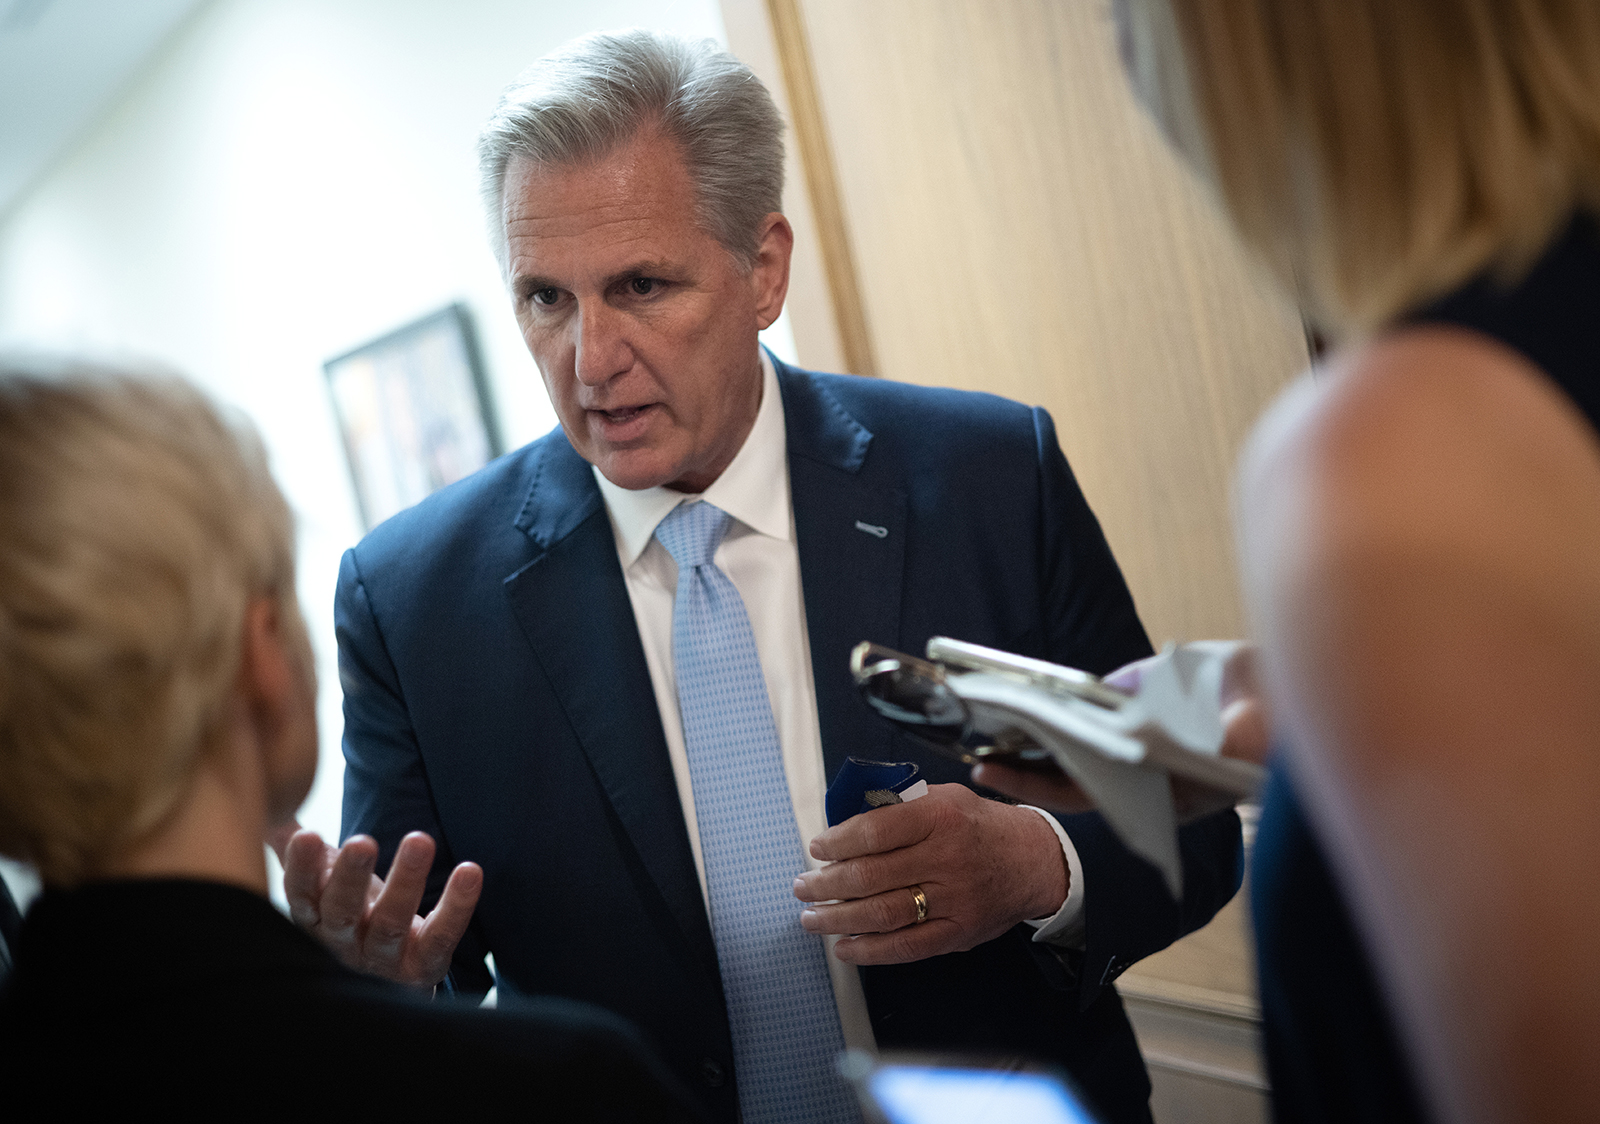 House Minority Leader Kevin McCarthy speaks with reporters after voting on the establishment of a commission to investigate the events of January 6 on May 19, in Washington, DC.